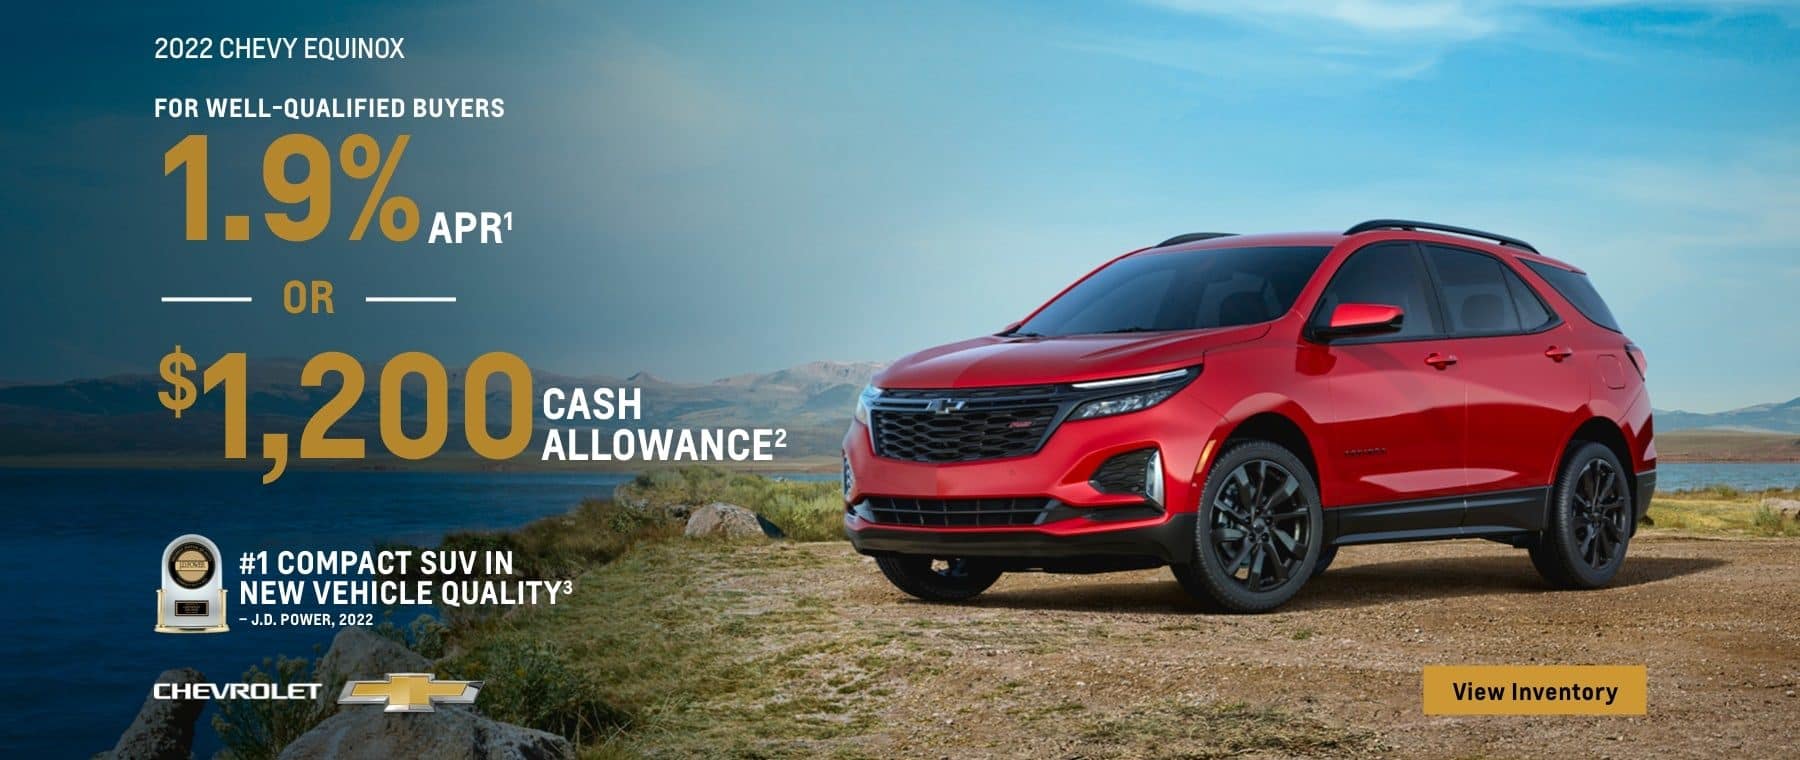 2022 Chevy Equinox. For well-qualified buyers 1.9% APR. Or, $1,200 cash allowance.